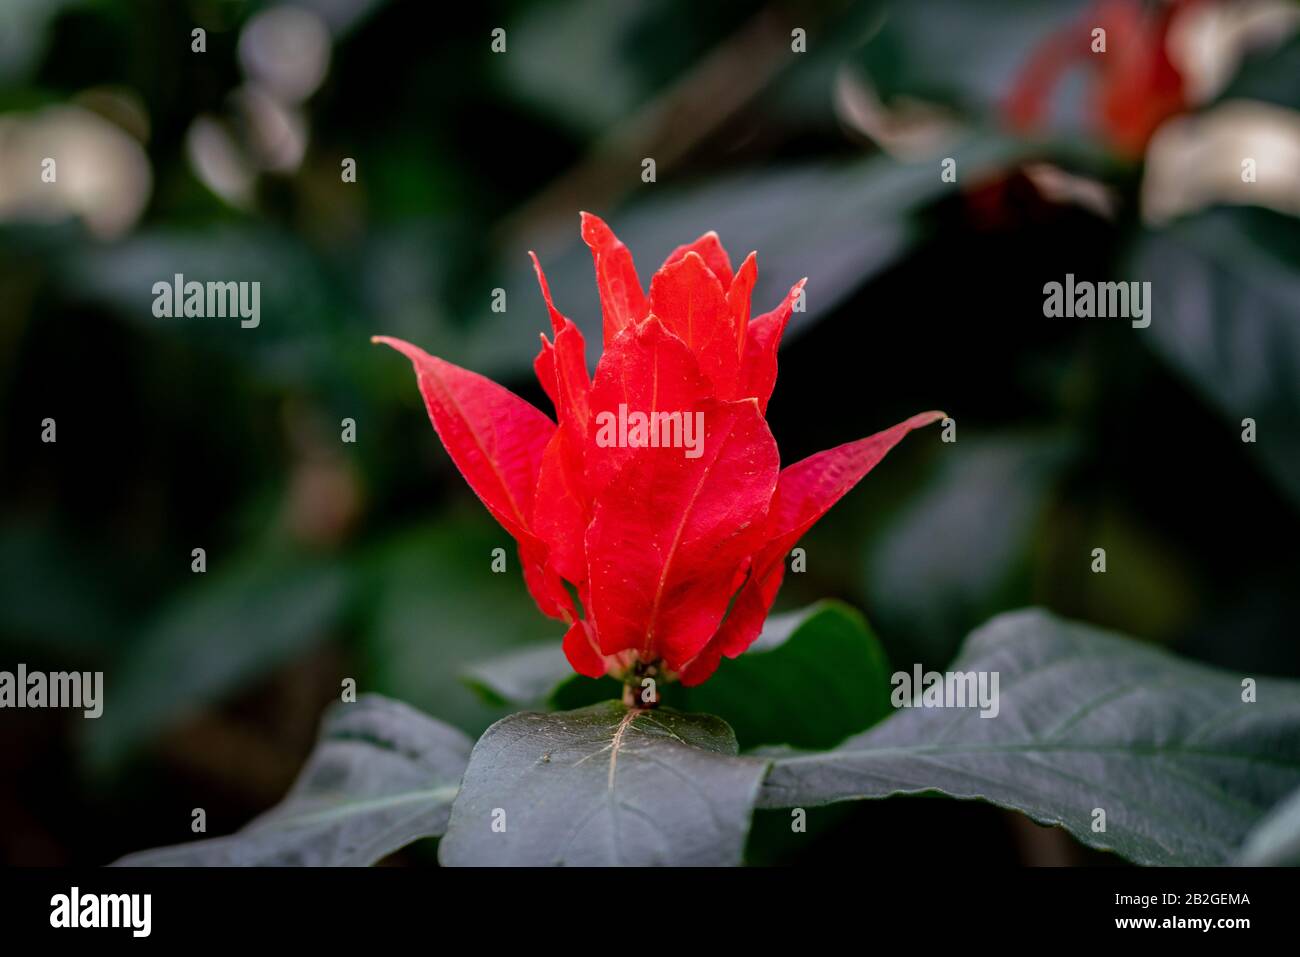 Close up of the red bracts of a Ruellia chartacea (red shrimp) plant Stock Photo